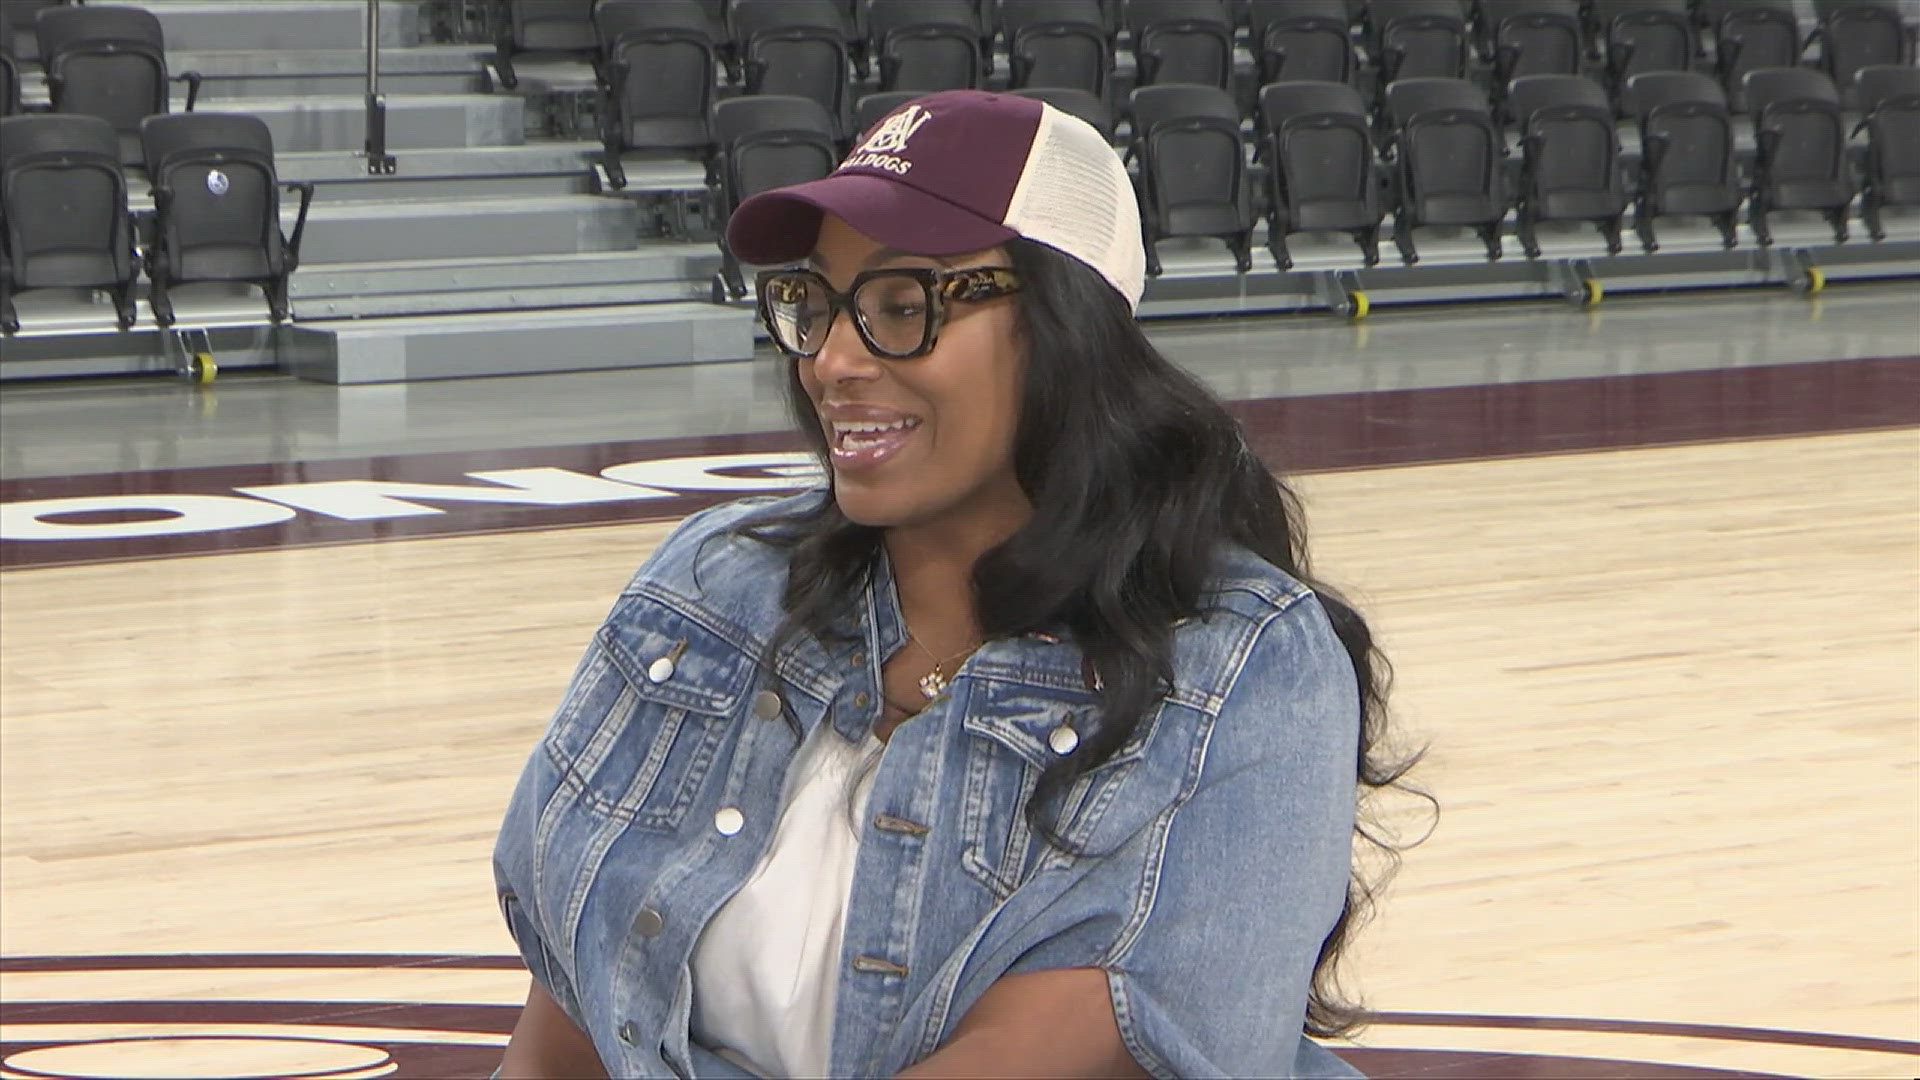 FOX54 Sports Director Mo Carter caught up with Dawn Thornton, the new head coach of the Alabama A&M Lady Bulldogs.